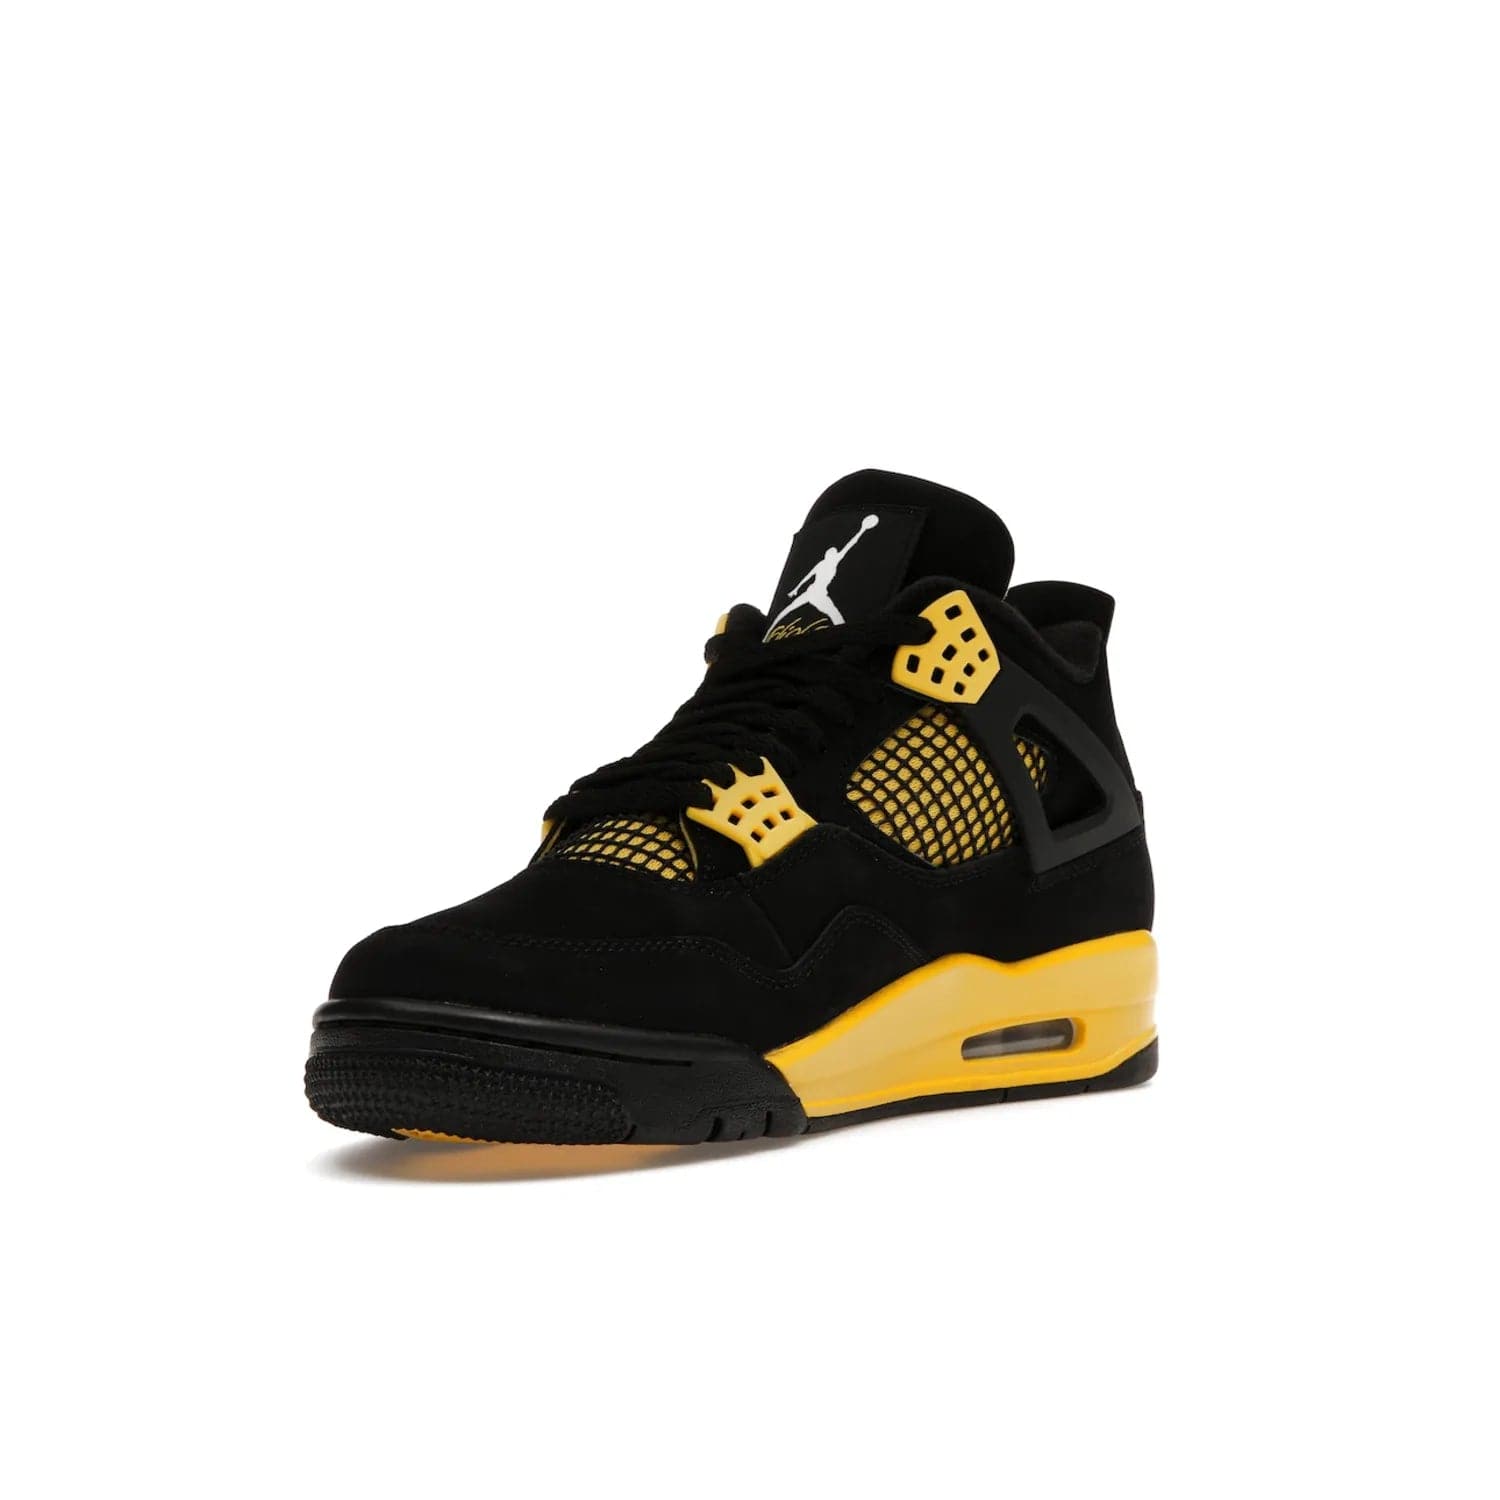 Jordan 4 Retro Thunder (2023) - Image 14 - Only at www.BallersClubKickz.com - Iconic Air Jordan 4 Retro Thunder (2023) returns with black nubuck upper and Tour Yellow details. Featuring Jumpman logo on heel tab, tongue and insoles. Dropping May 13th, 2023.